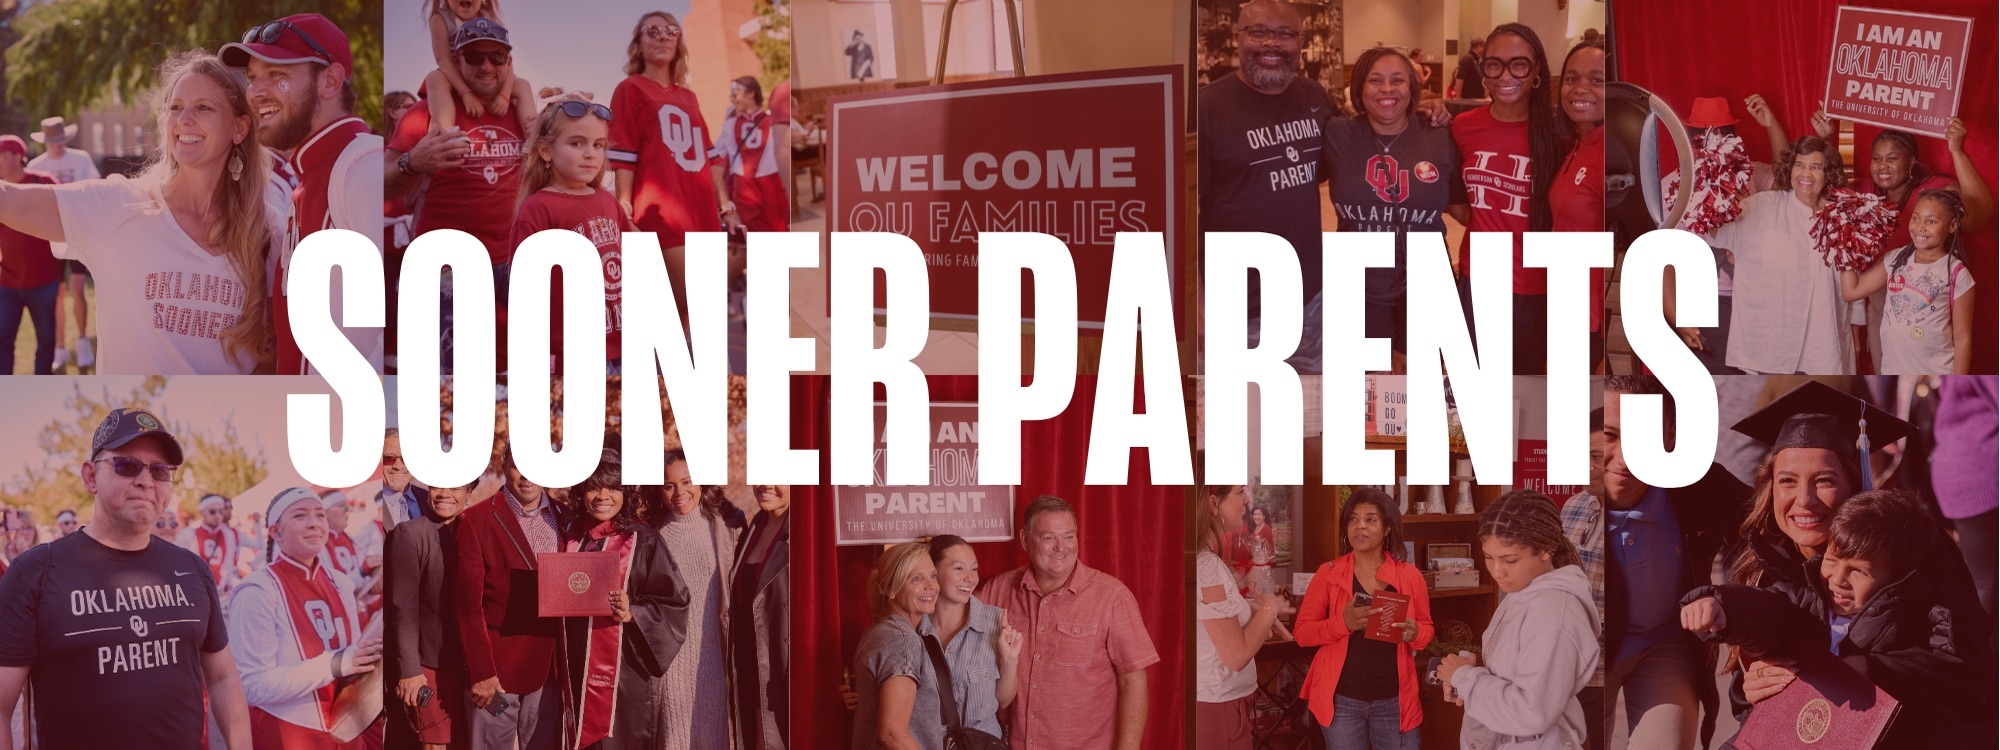 photo collage of Sooner Parents events with Sooner Parents written out in white lettering and a crimson overlay.